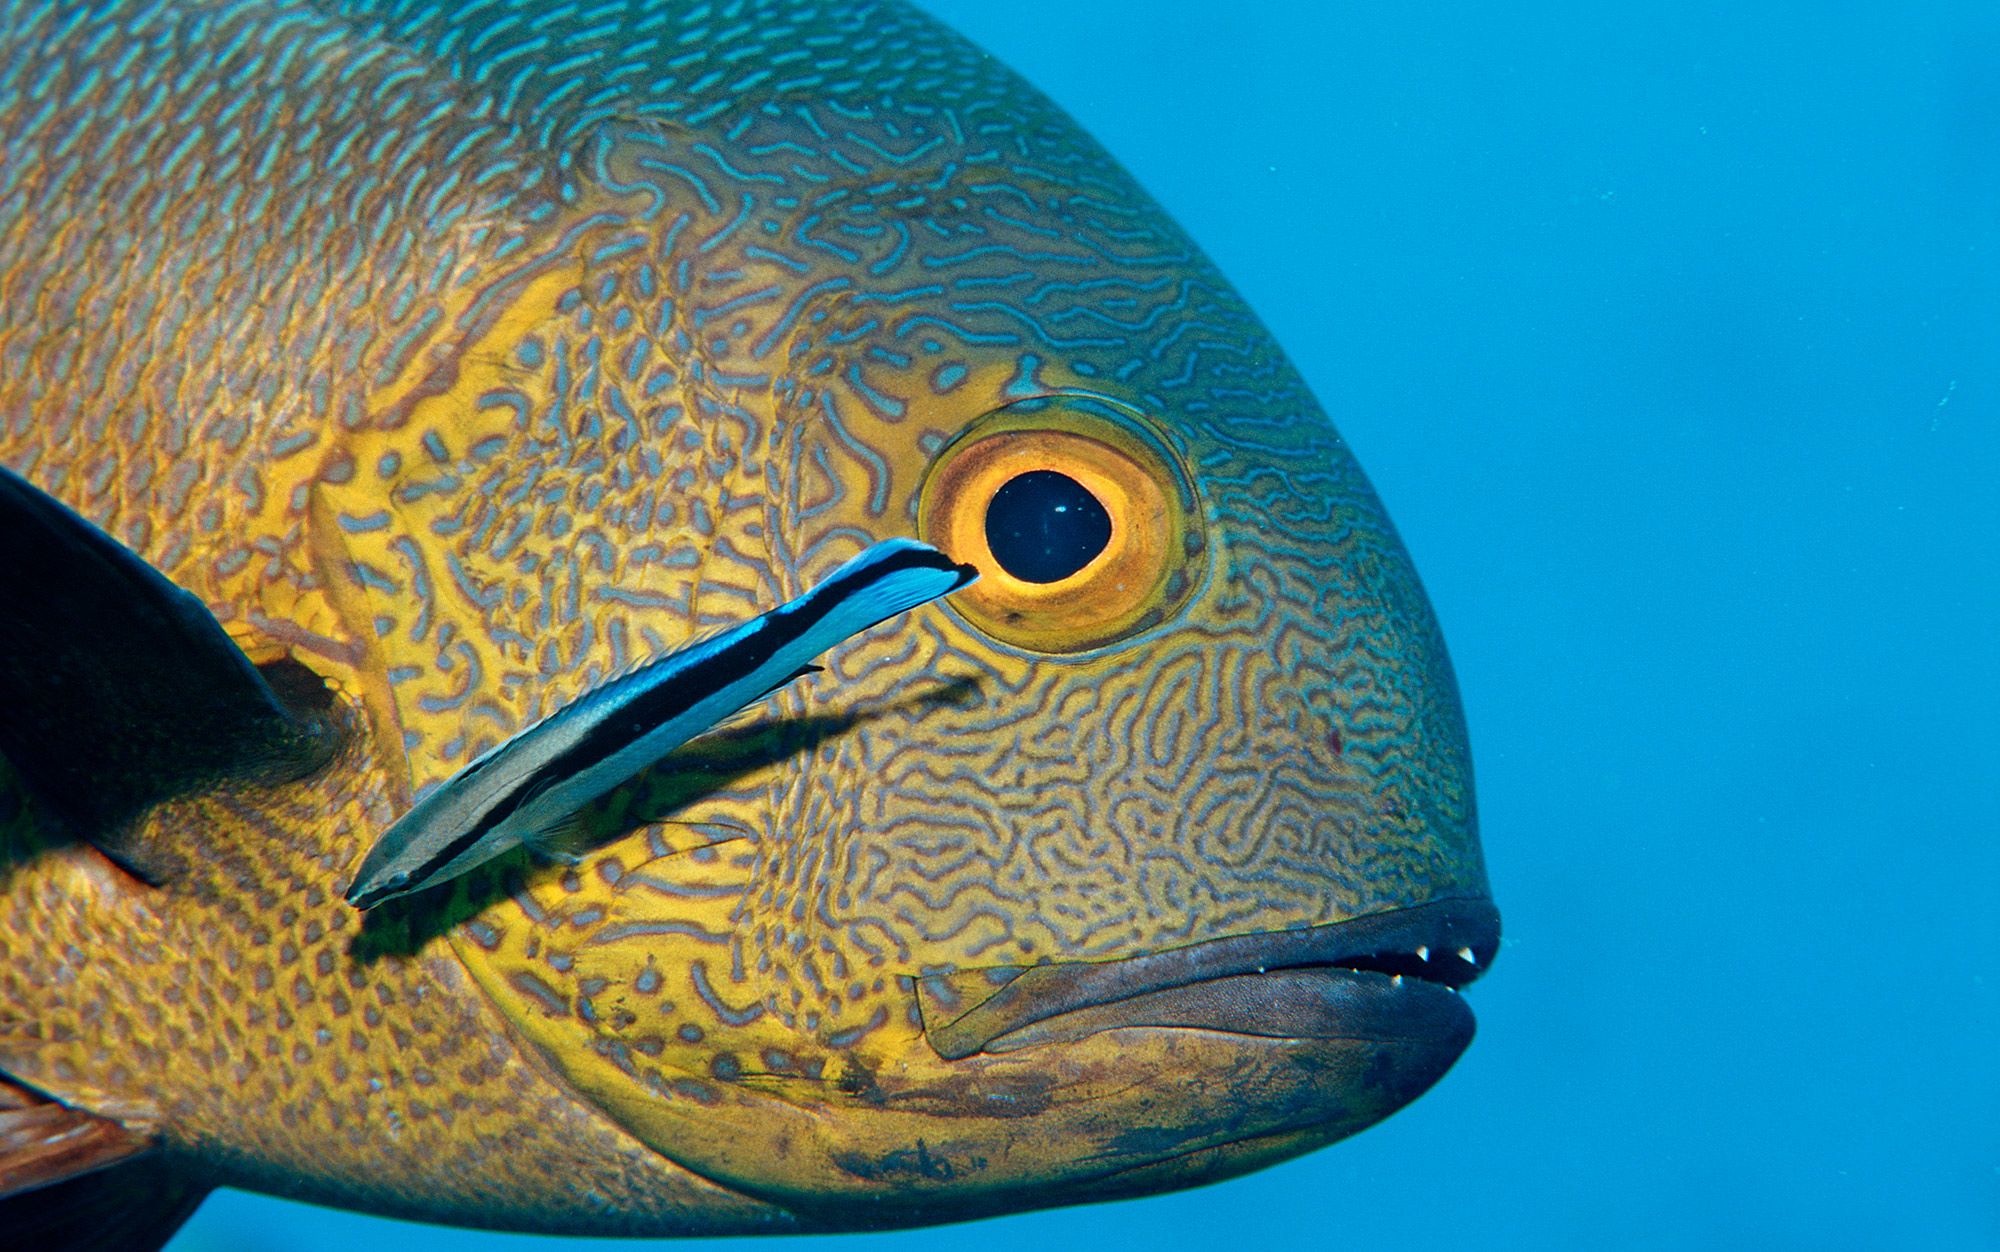 The face of the fish | Aeon